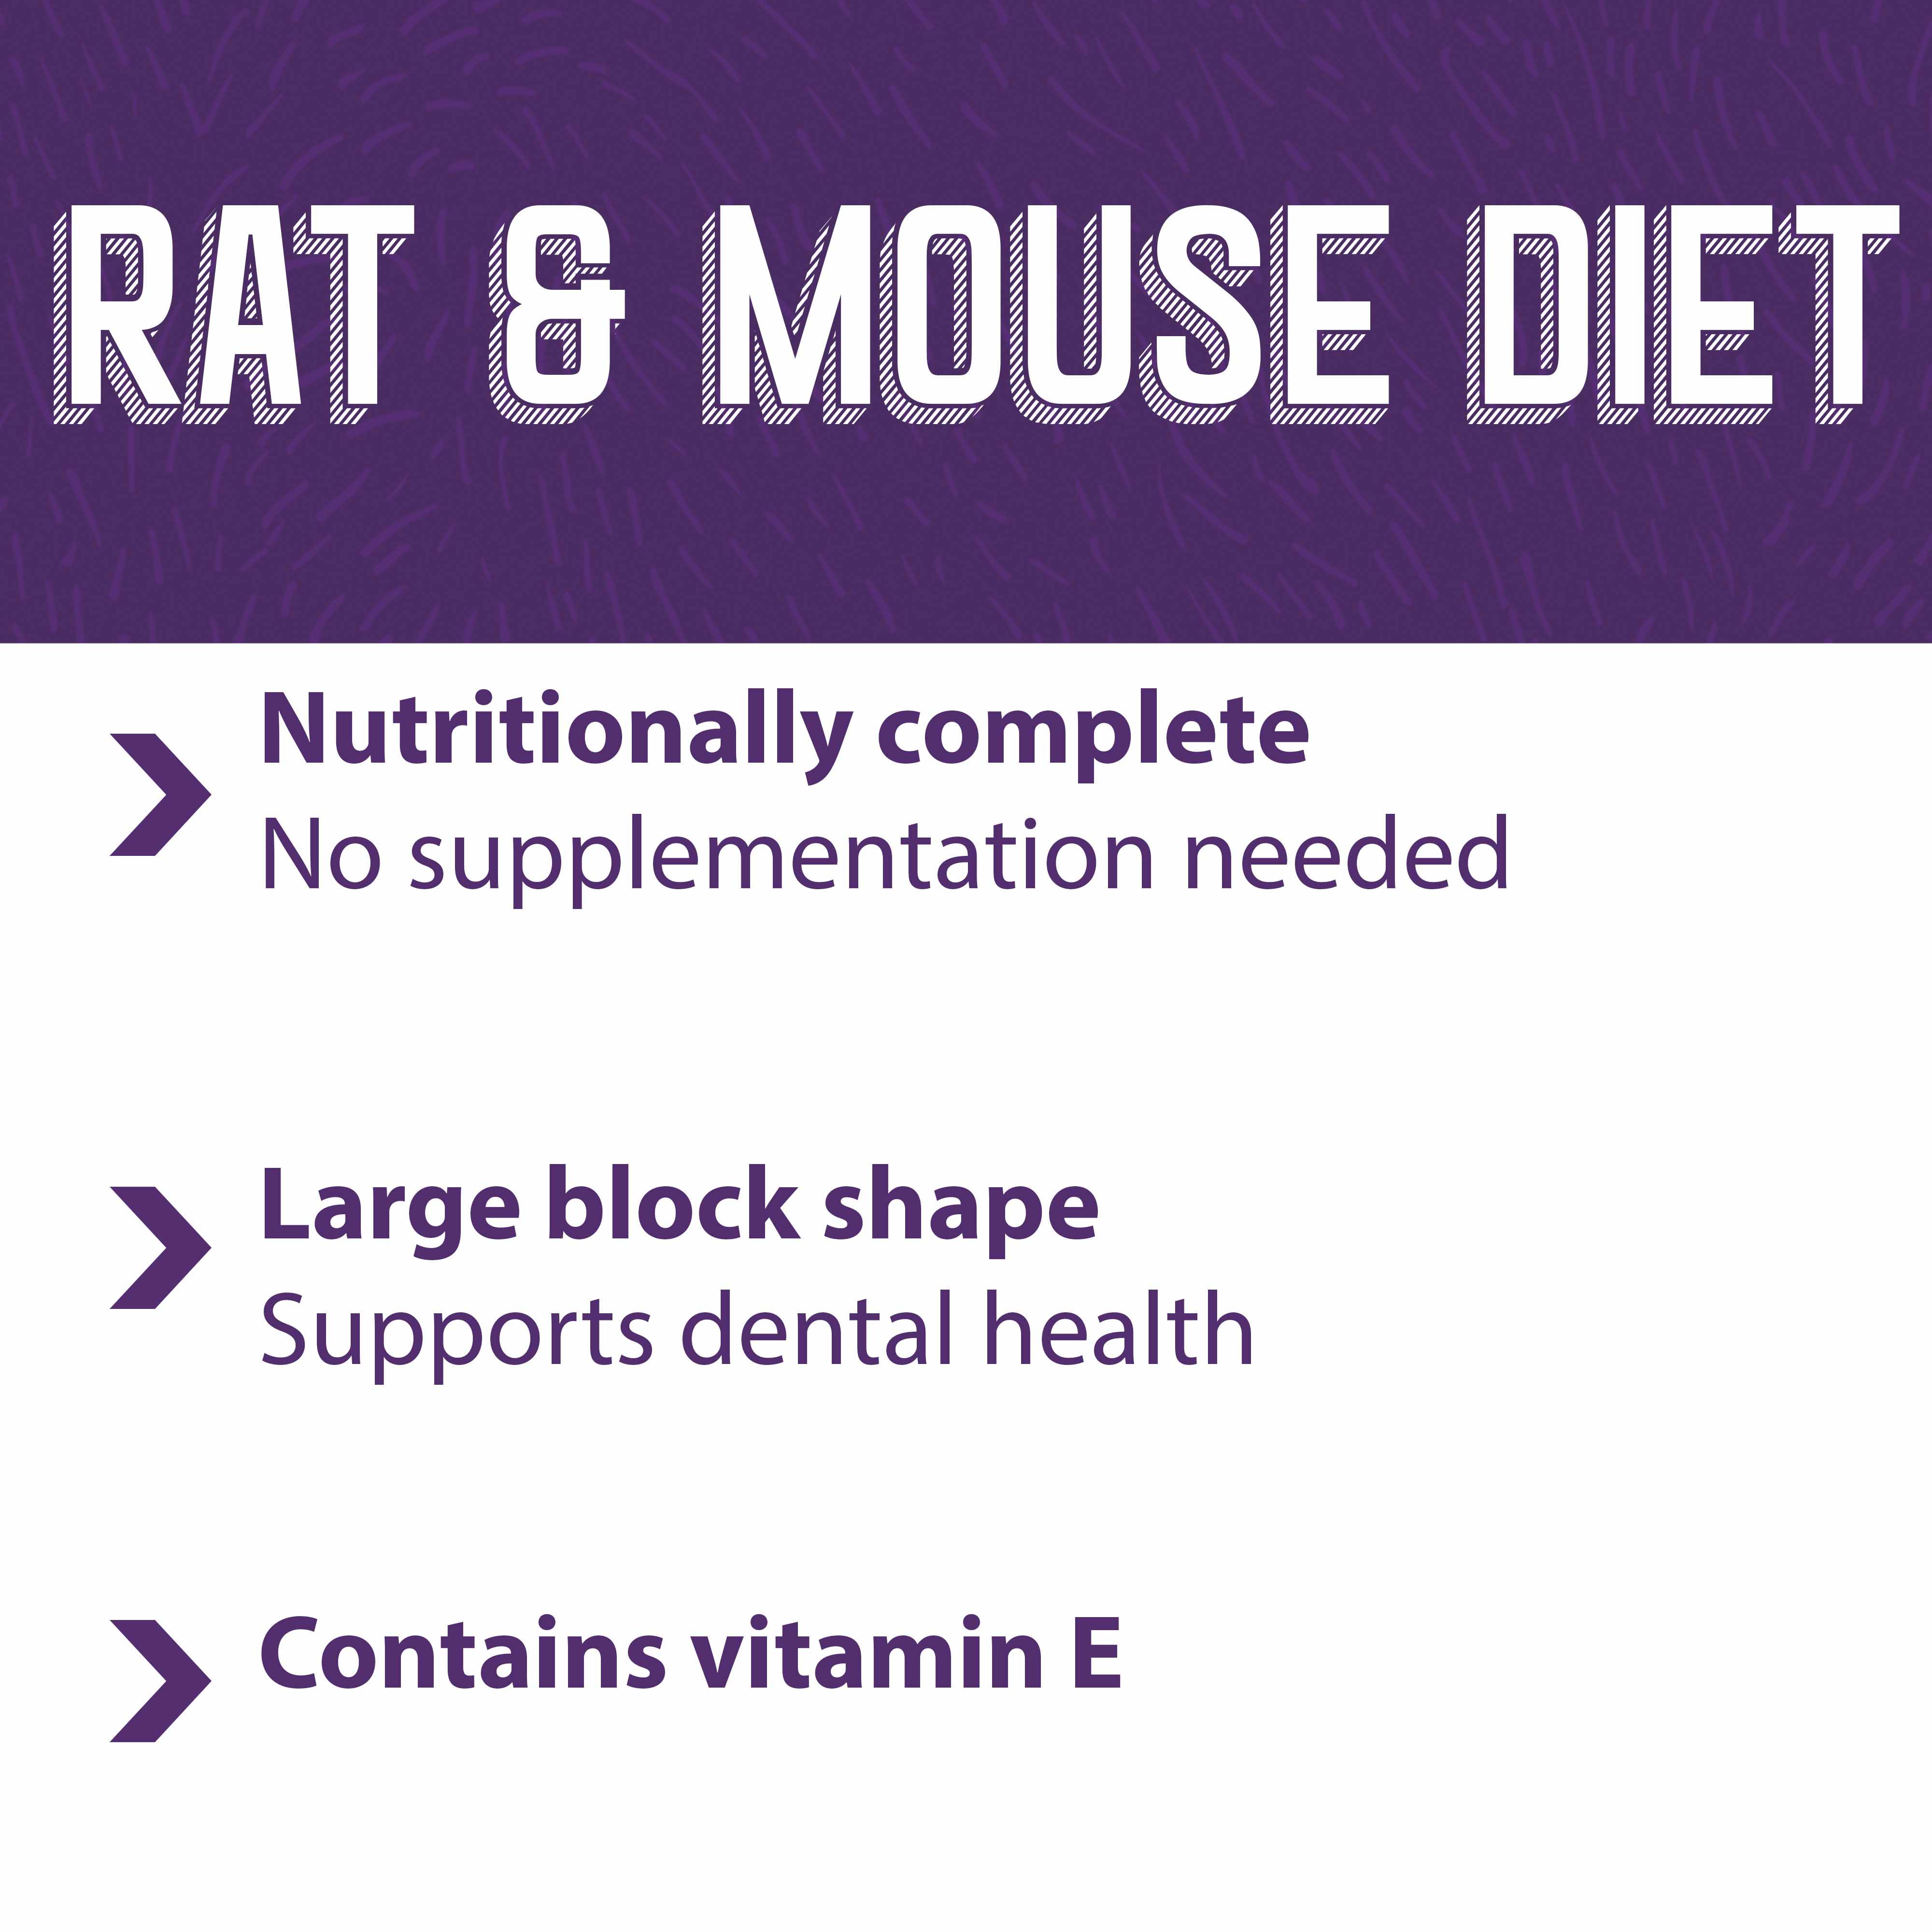 Rat and mouse diet is nutritionally complete